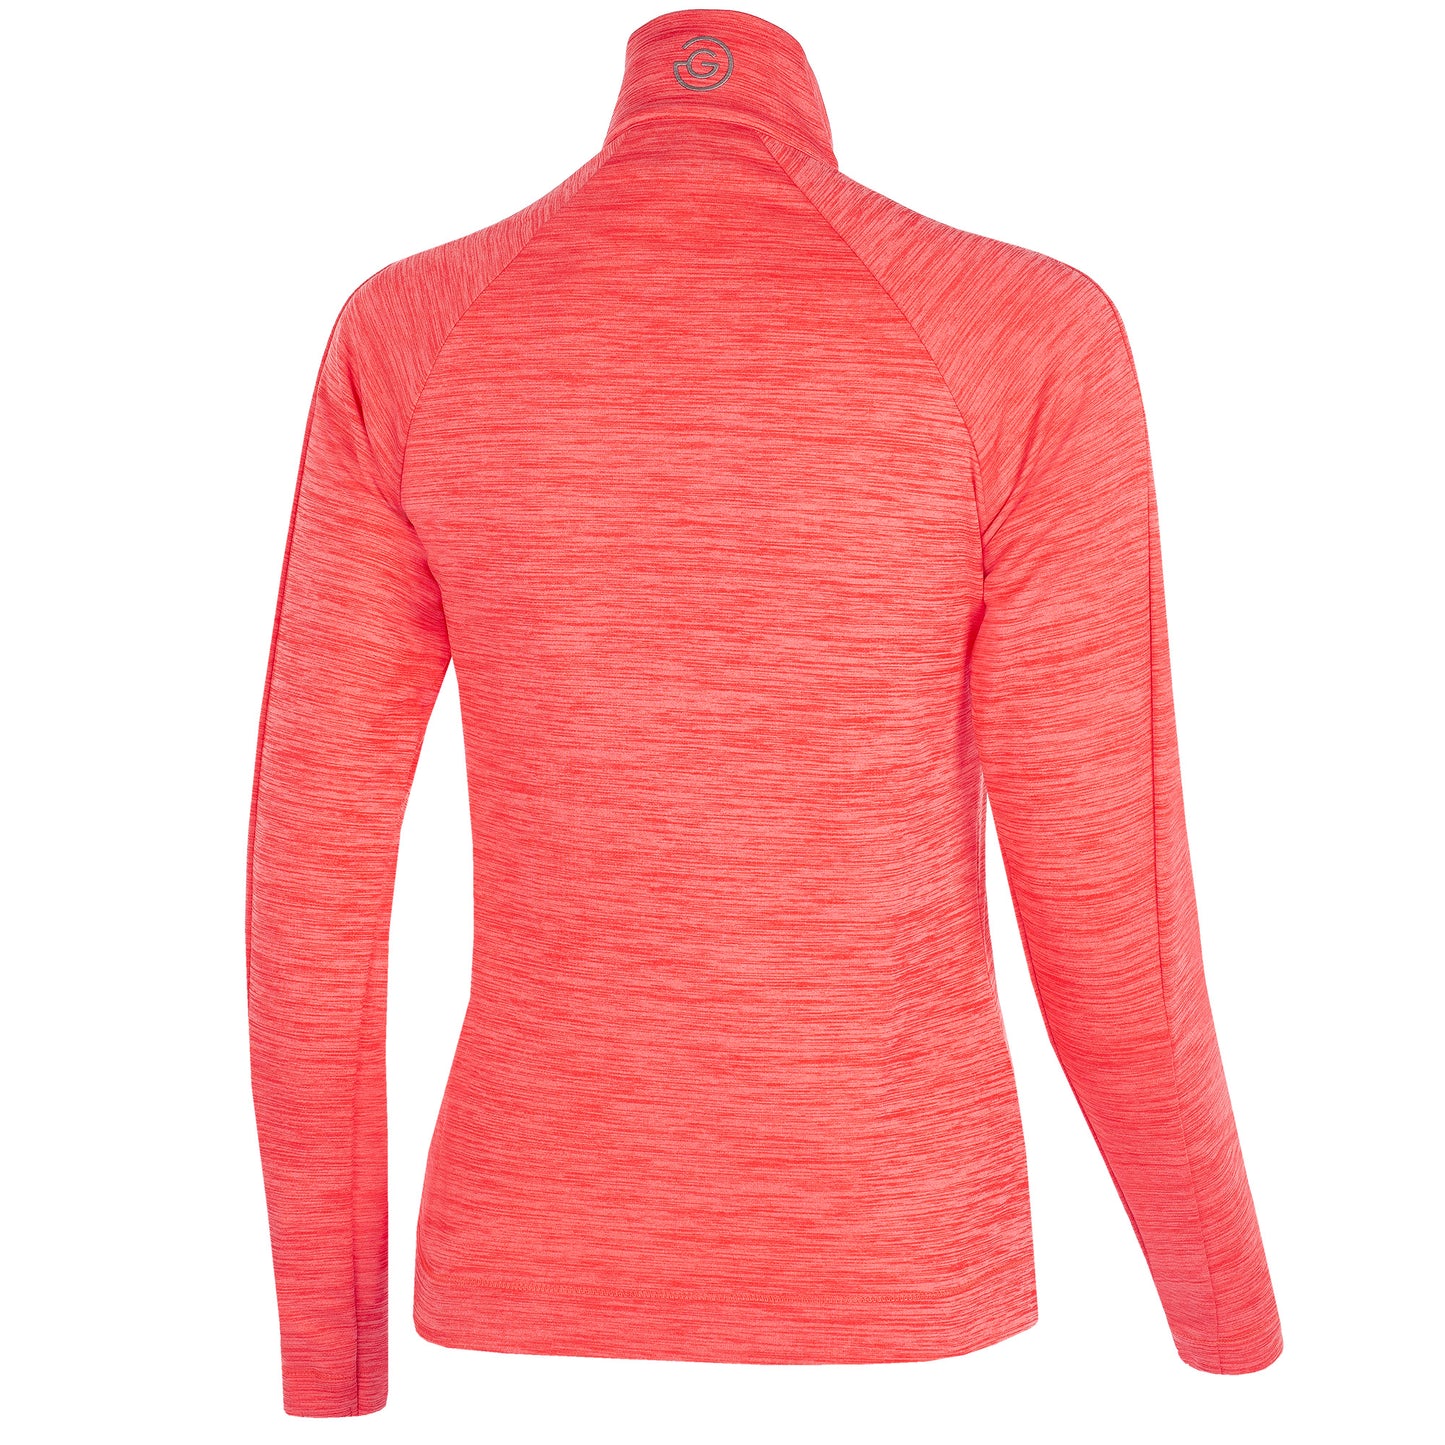 Galvin Green Ladies INSULA Zip Neck Mid-layer Top in Coral